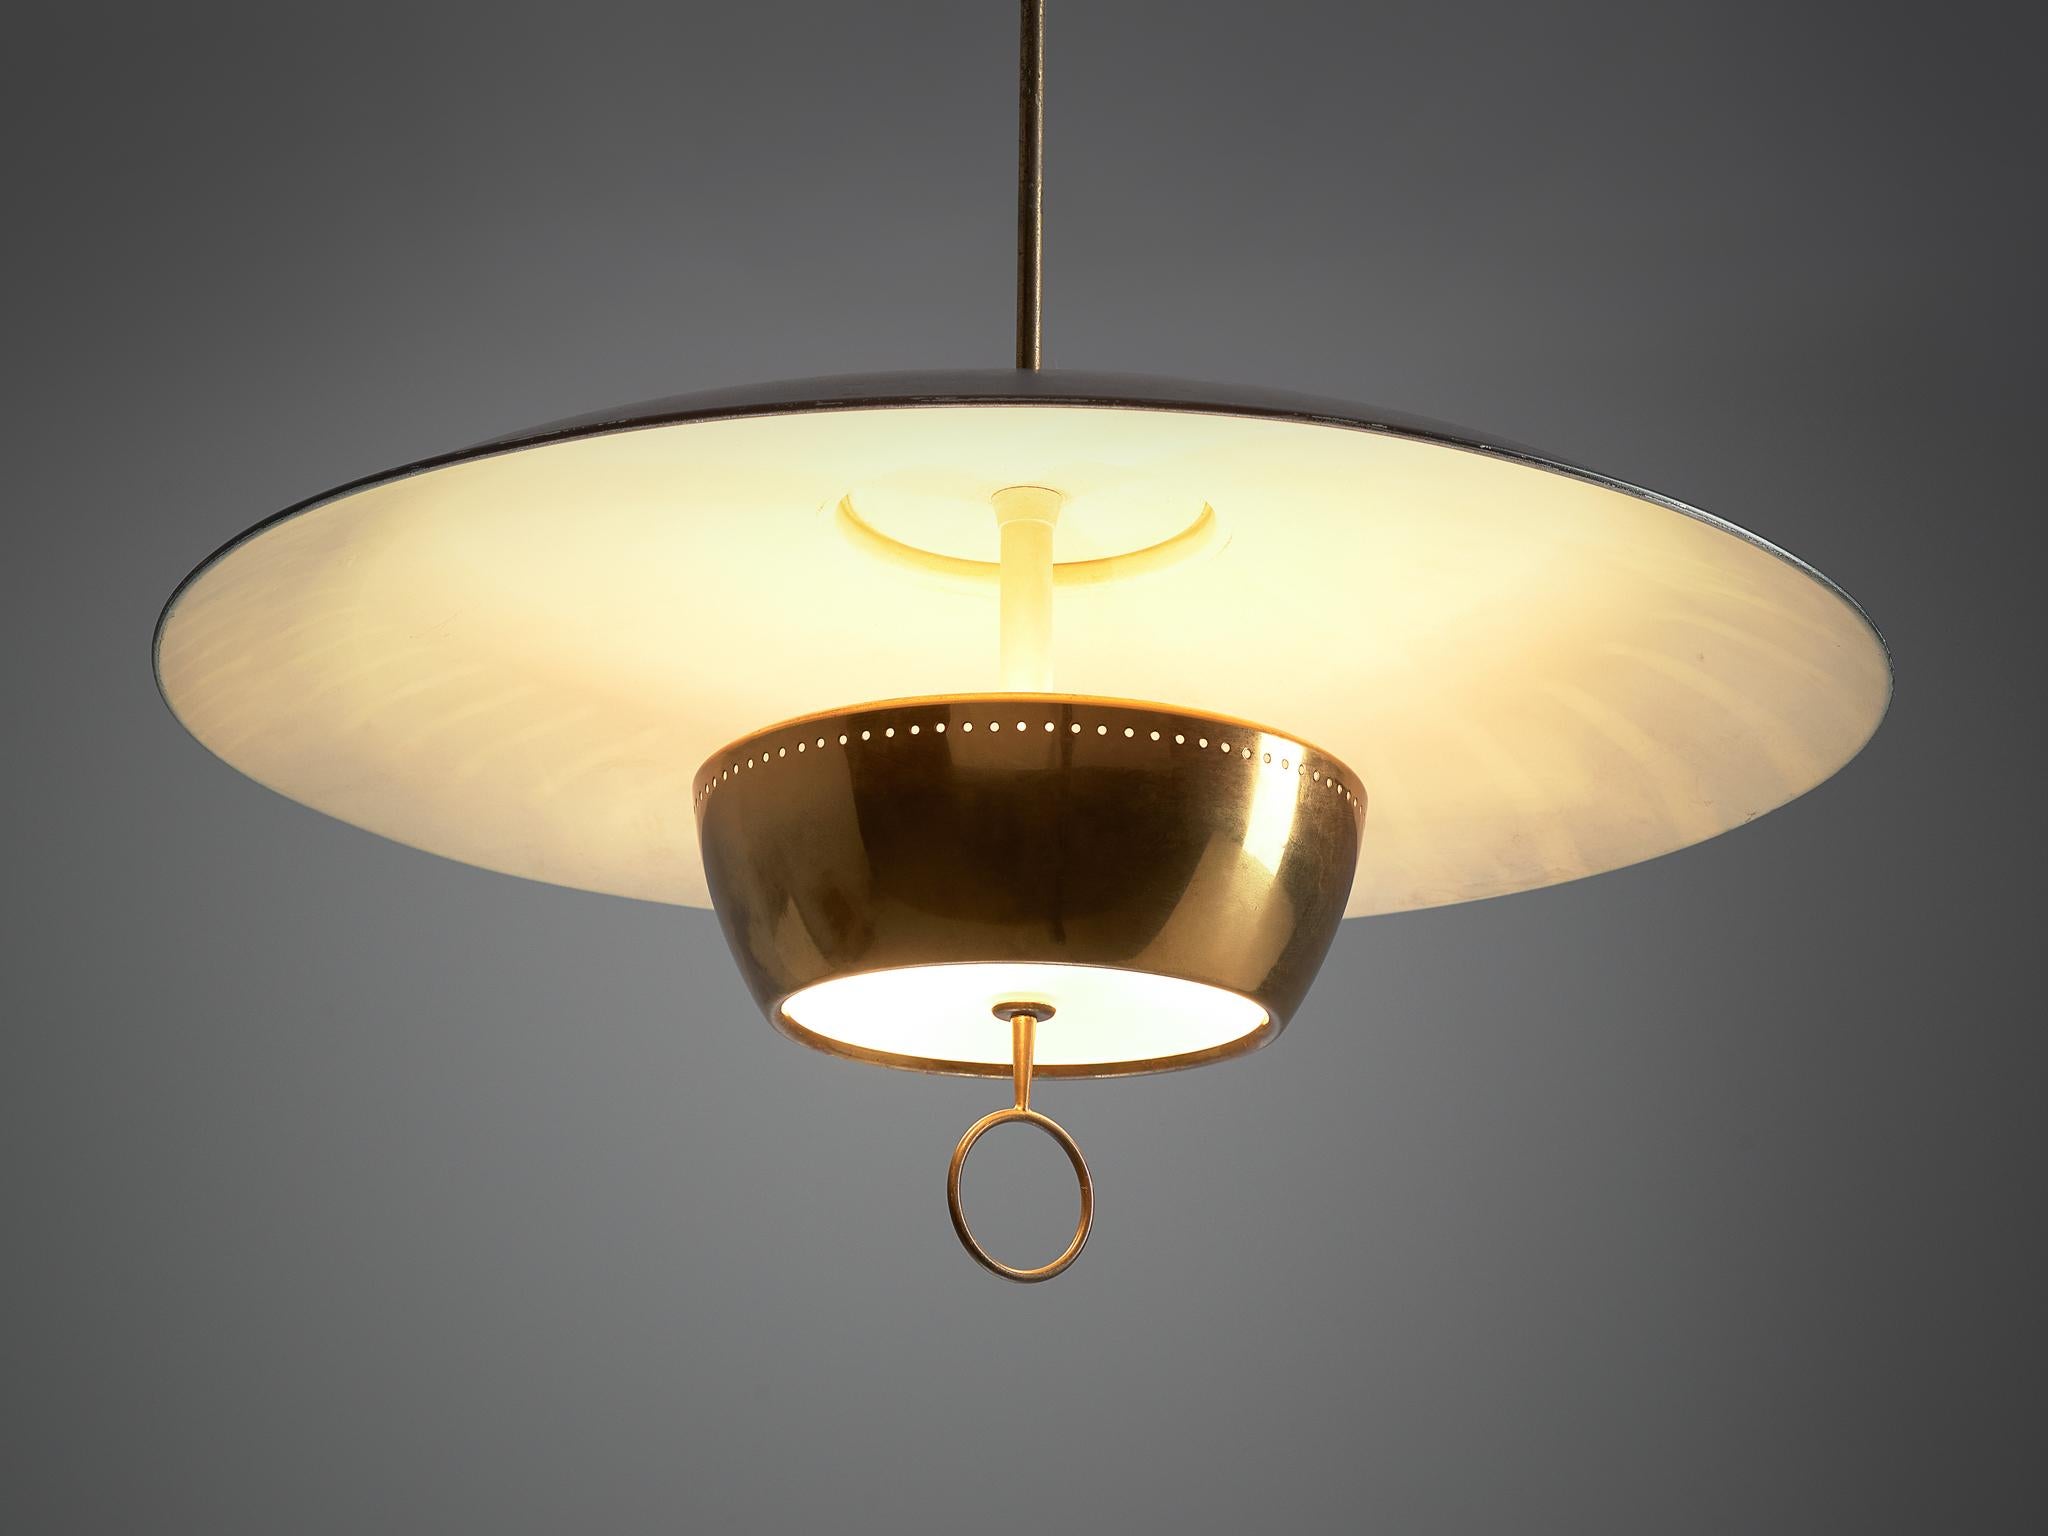 Gaetano Sciolari for Stilnovo, ceiling light model 1244, metal, brass, Italy, 1950

Elegant and modern pendant in nickel-plated pendant with black coated shade by Sciolari. Adjustable in height due the counterweight. Nickel-plated ring with